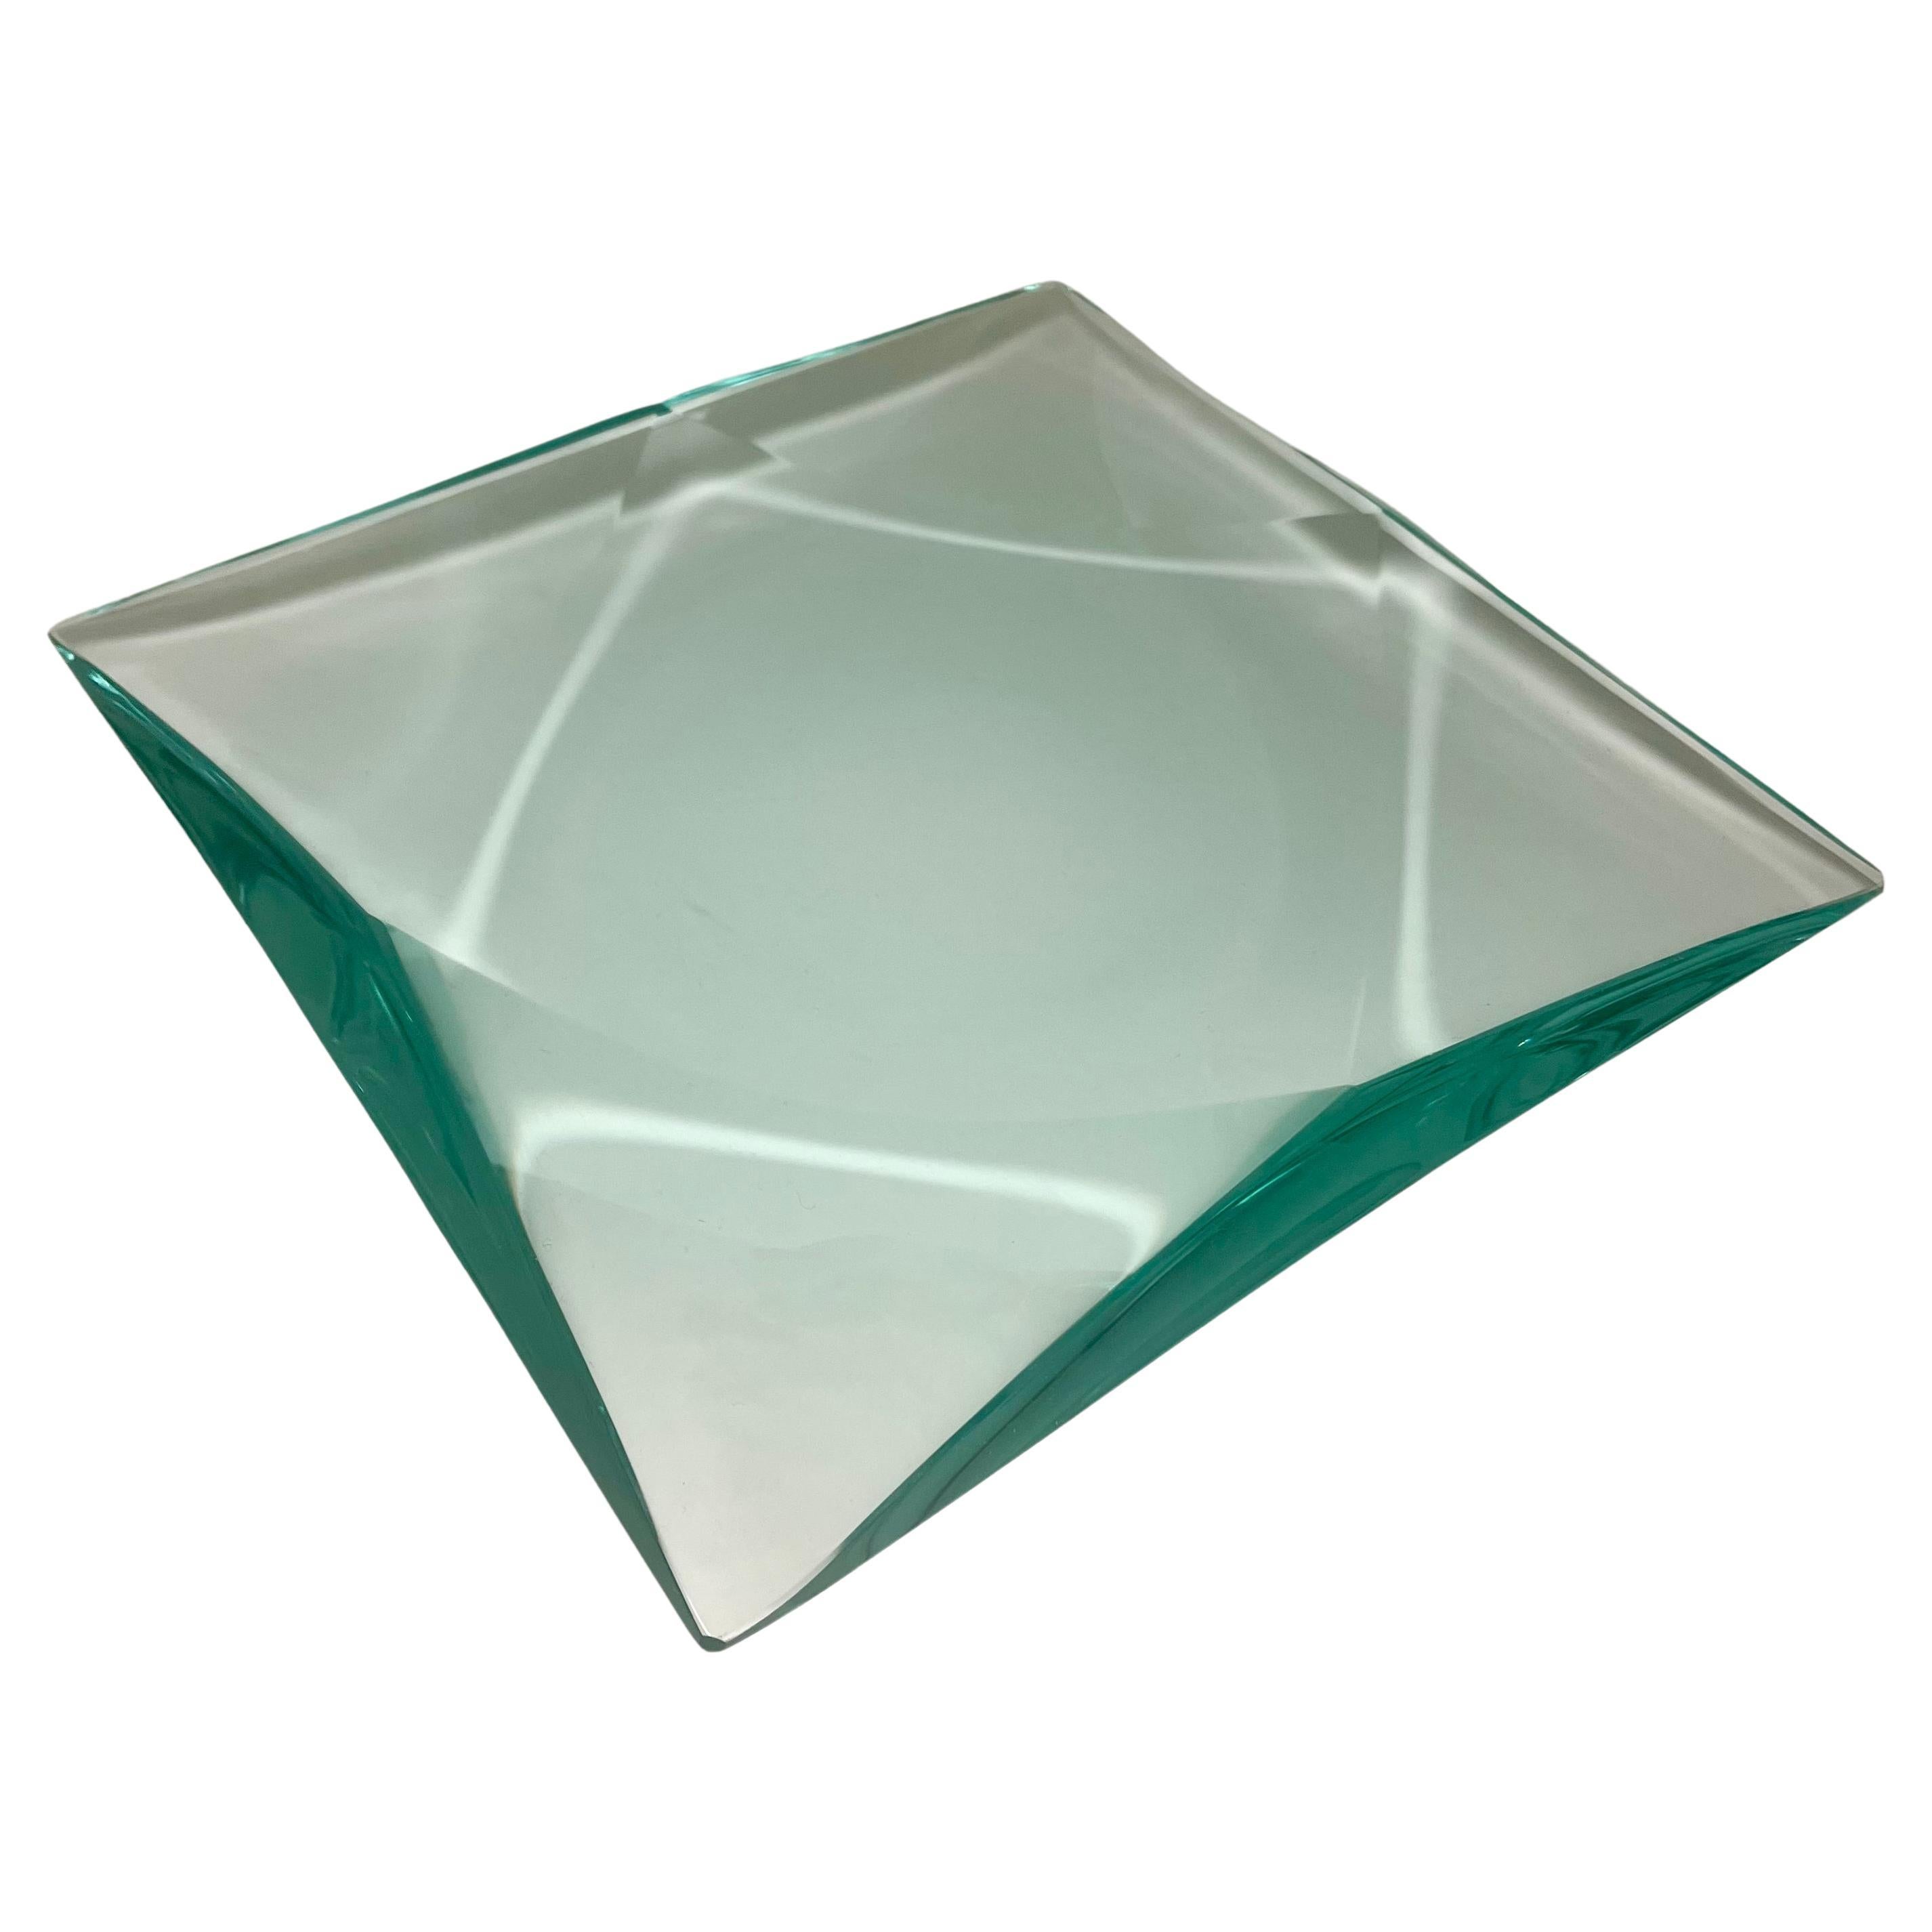 Contemporary Decorative Handmade Crystal Bowl by Ghiró Studio For Sale